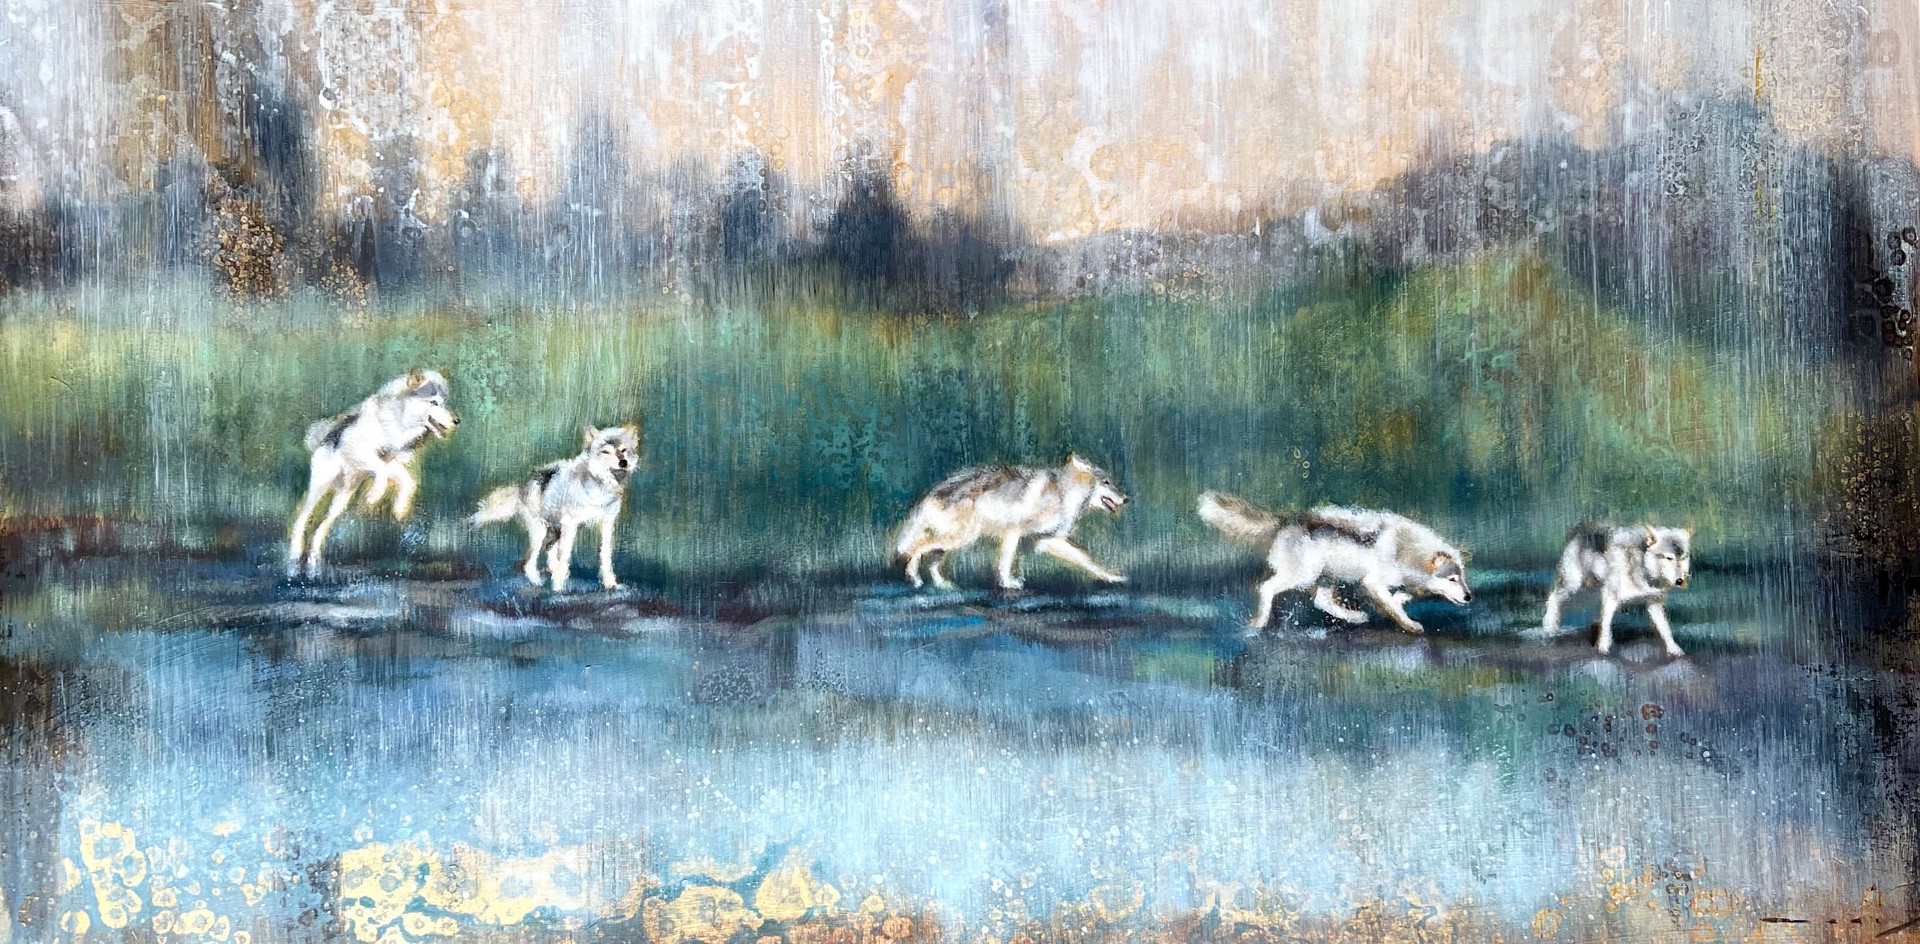 Original Mixed Media Painting By Nealy Riley Featuring Wolf Pack Over Abstract Background